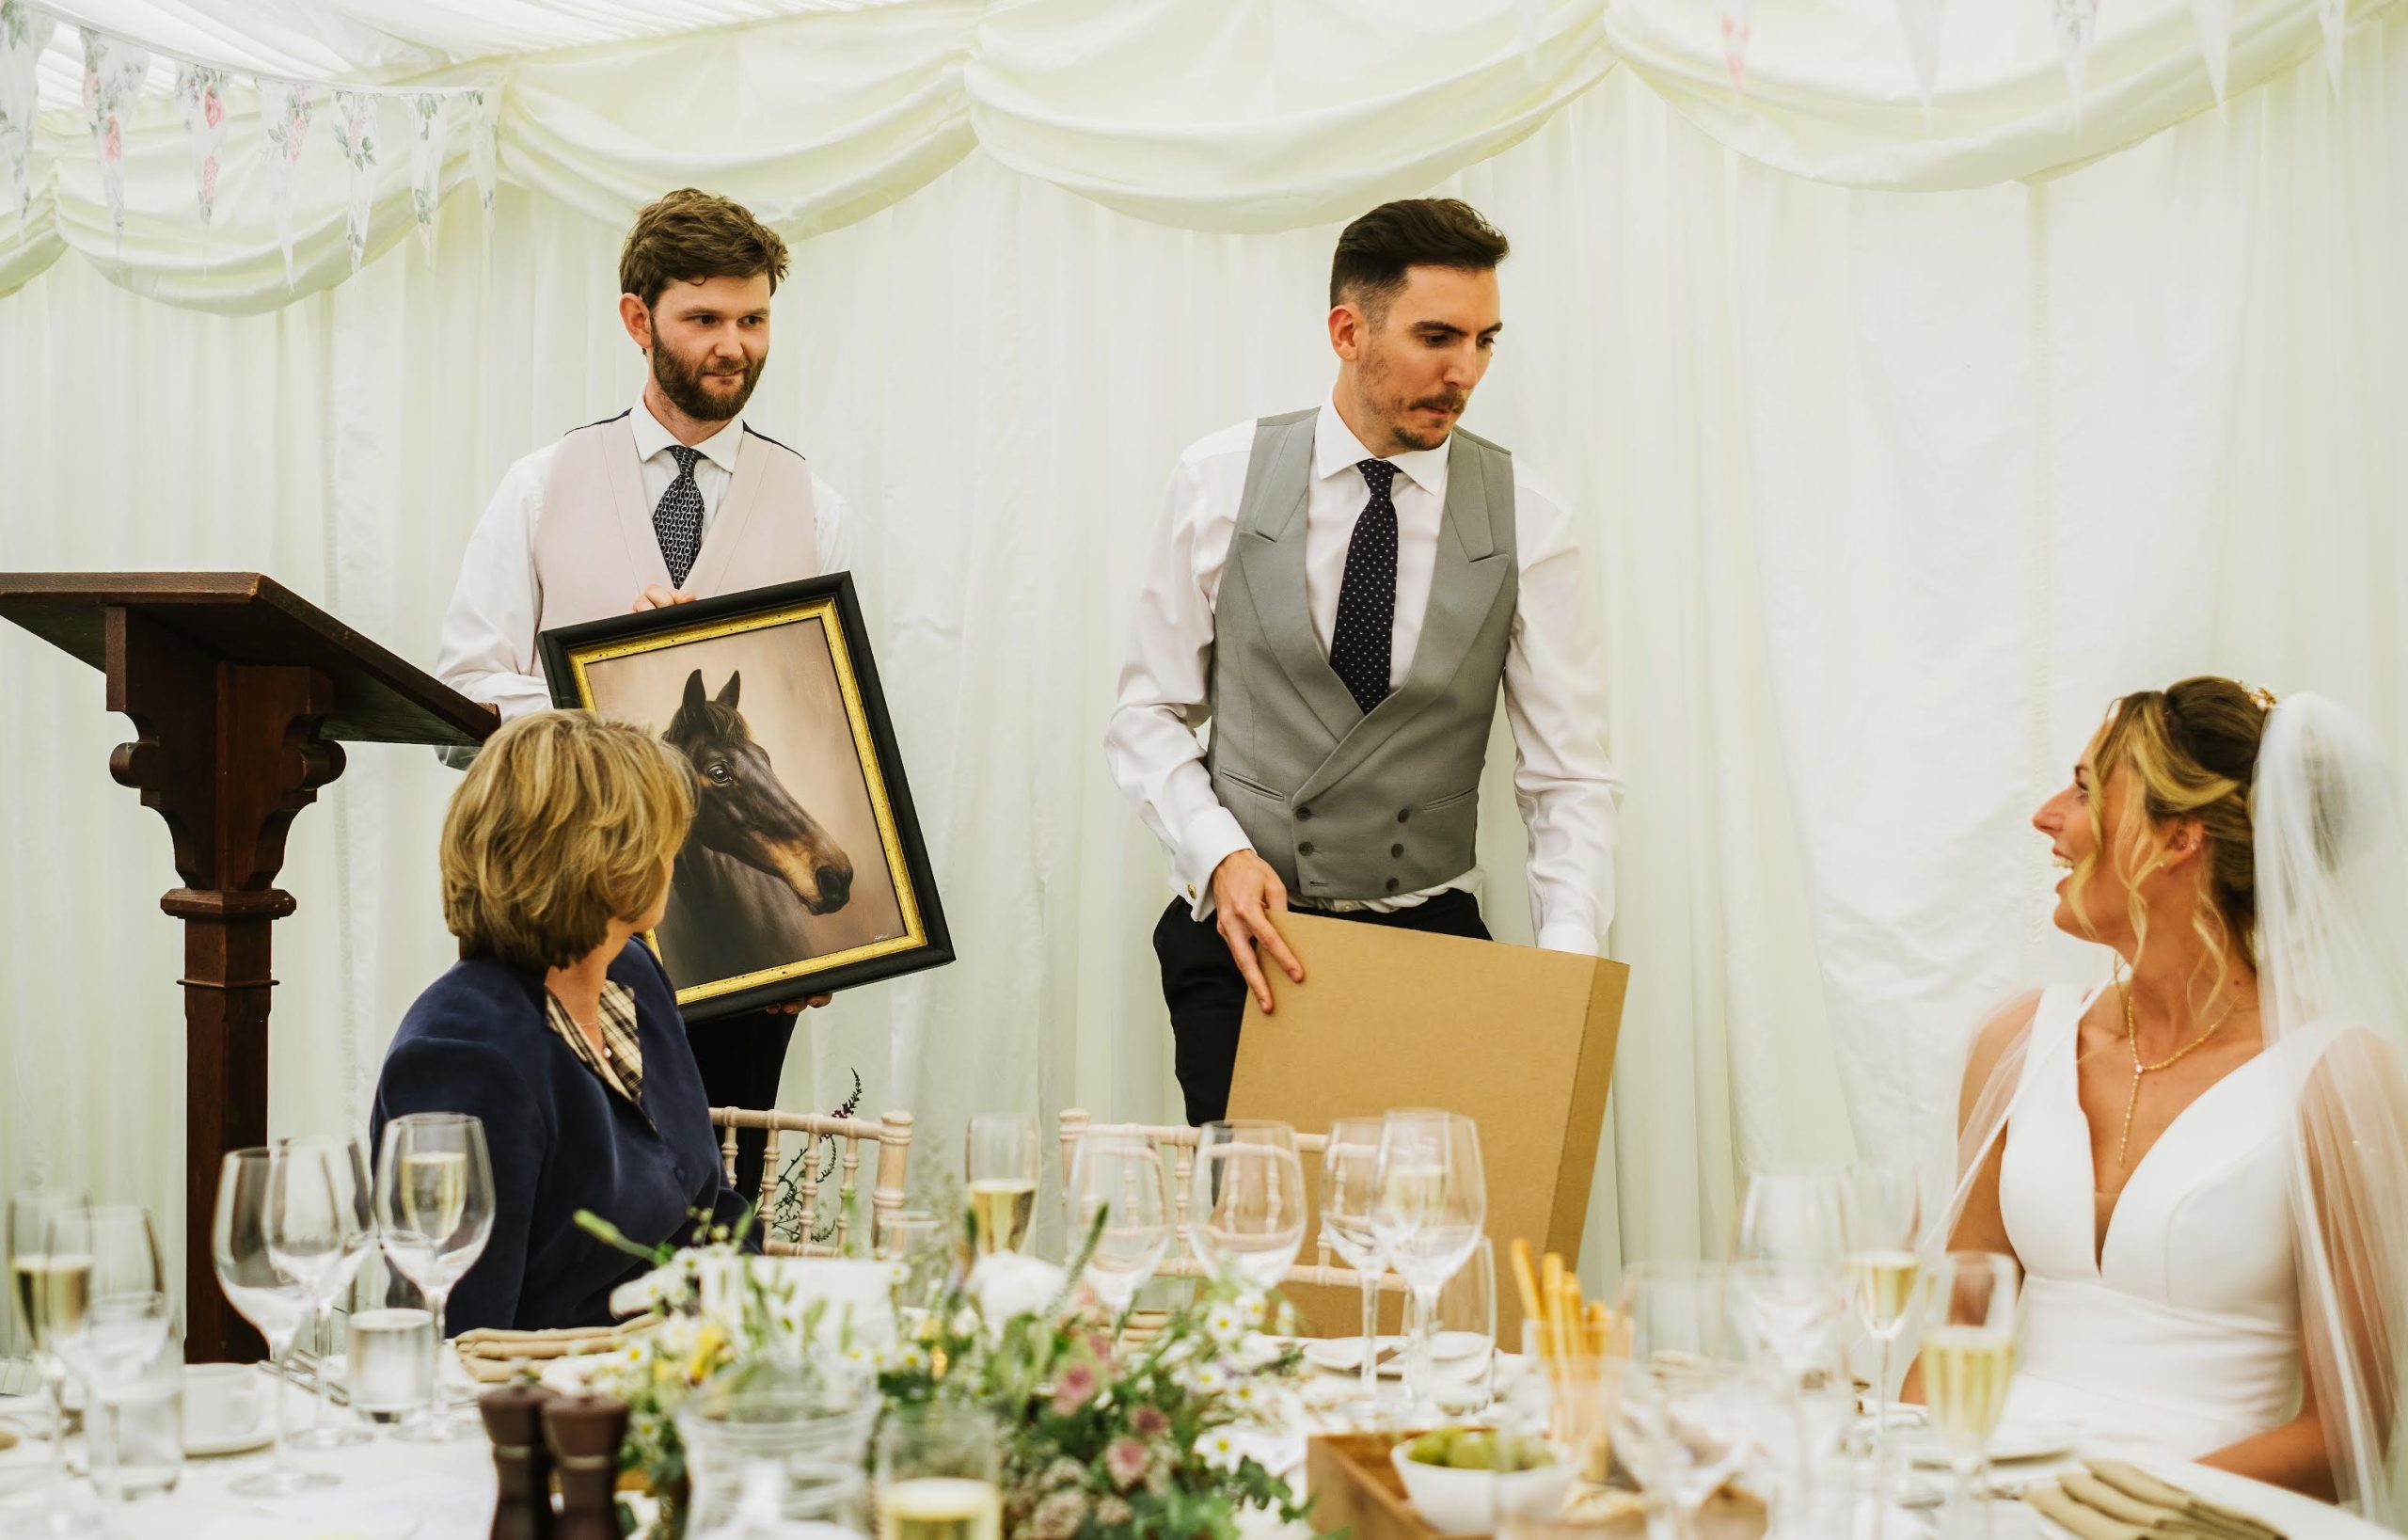 The wedding in progress, handing over the horse portrait during the wedding speeches